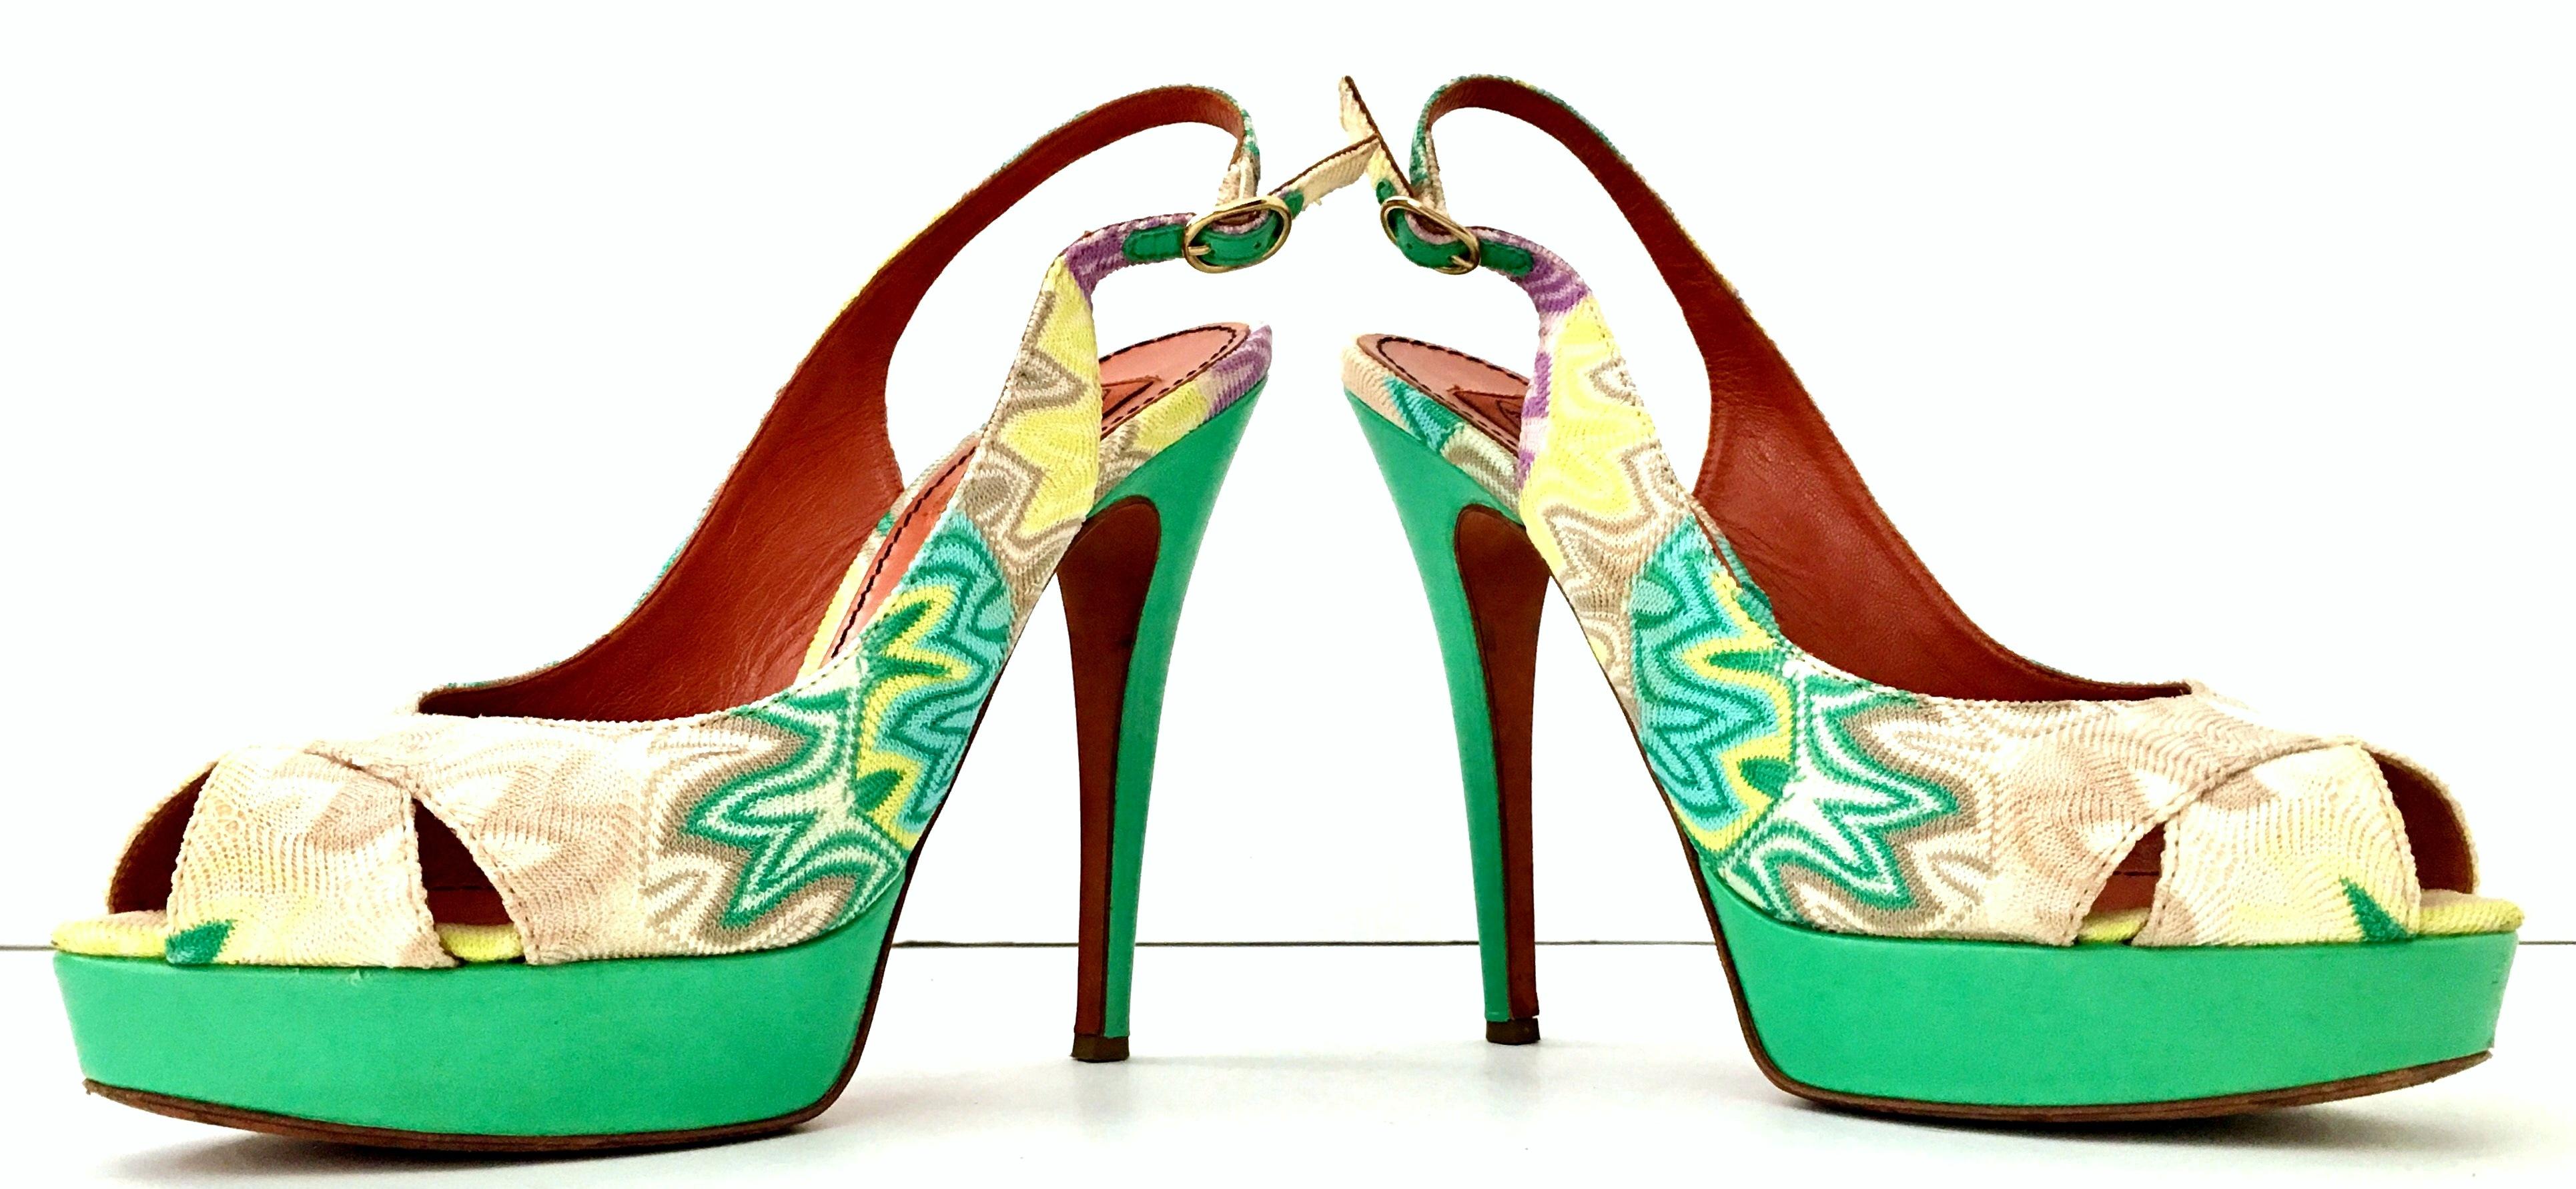 21st Century Contemporary & New Aqua leather heel chevron fabric peep toe sling back platform shoes By, Missoni. These never worn but for a runway show platform sandals feature, vivid aqua leather with multi color iconic 